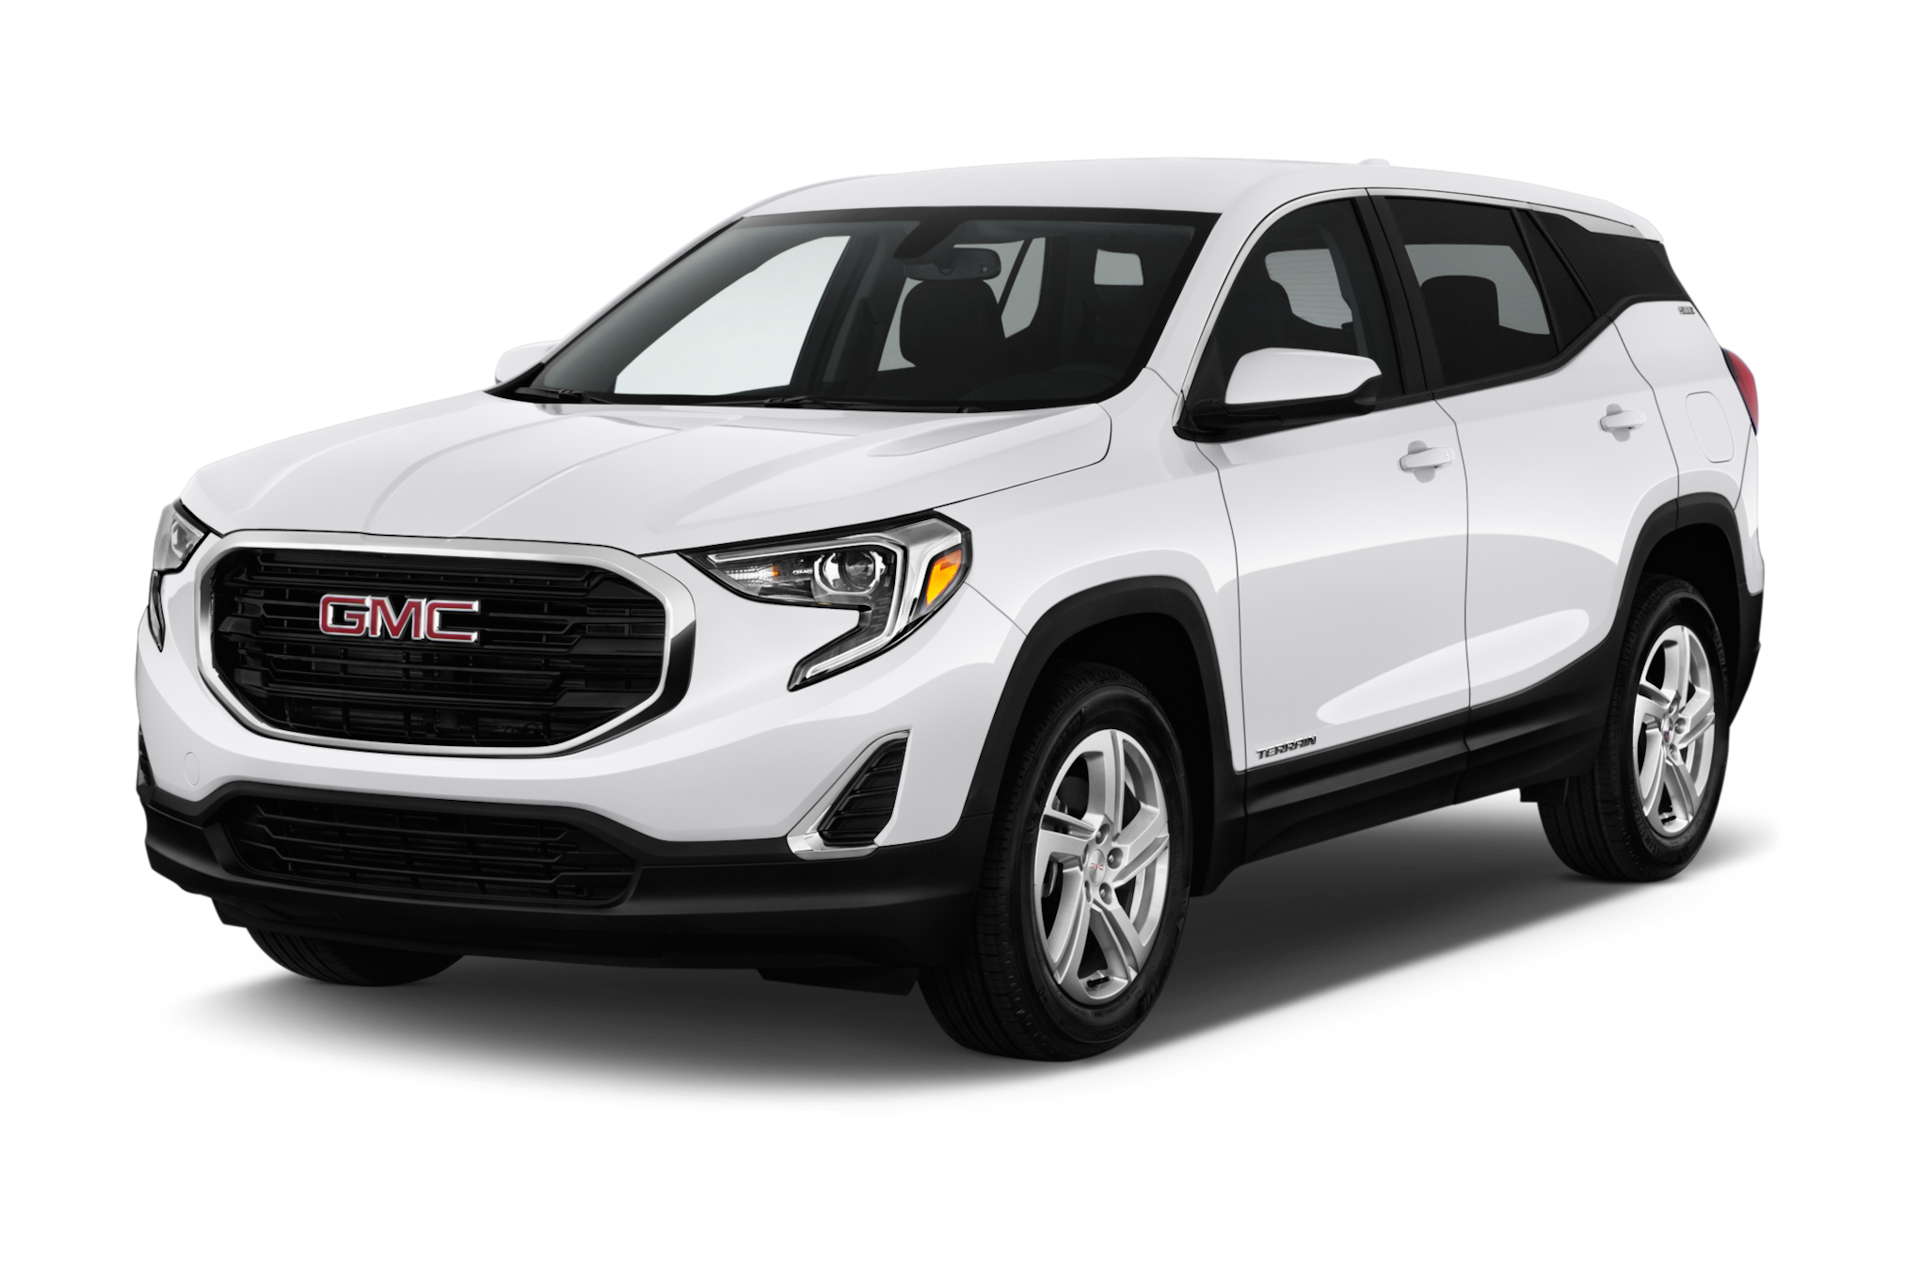 2018 GMC Terrain Prices, Reviews, and Photos - MotorTrend